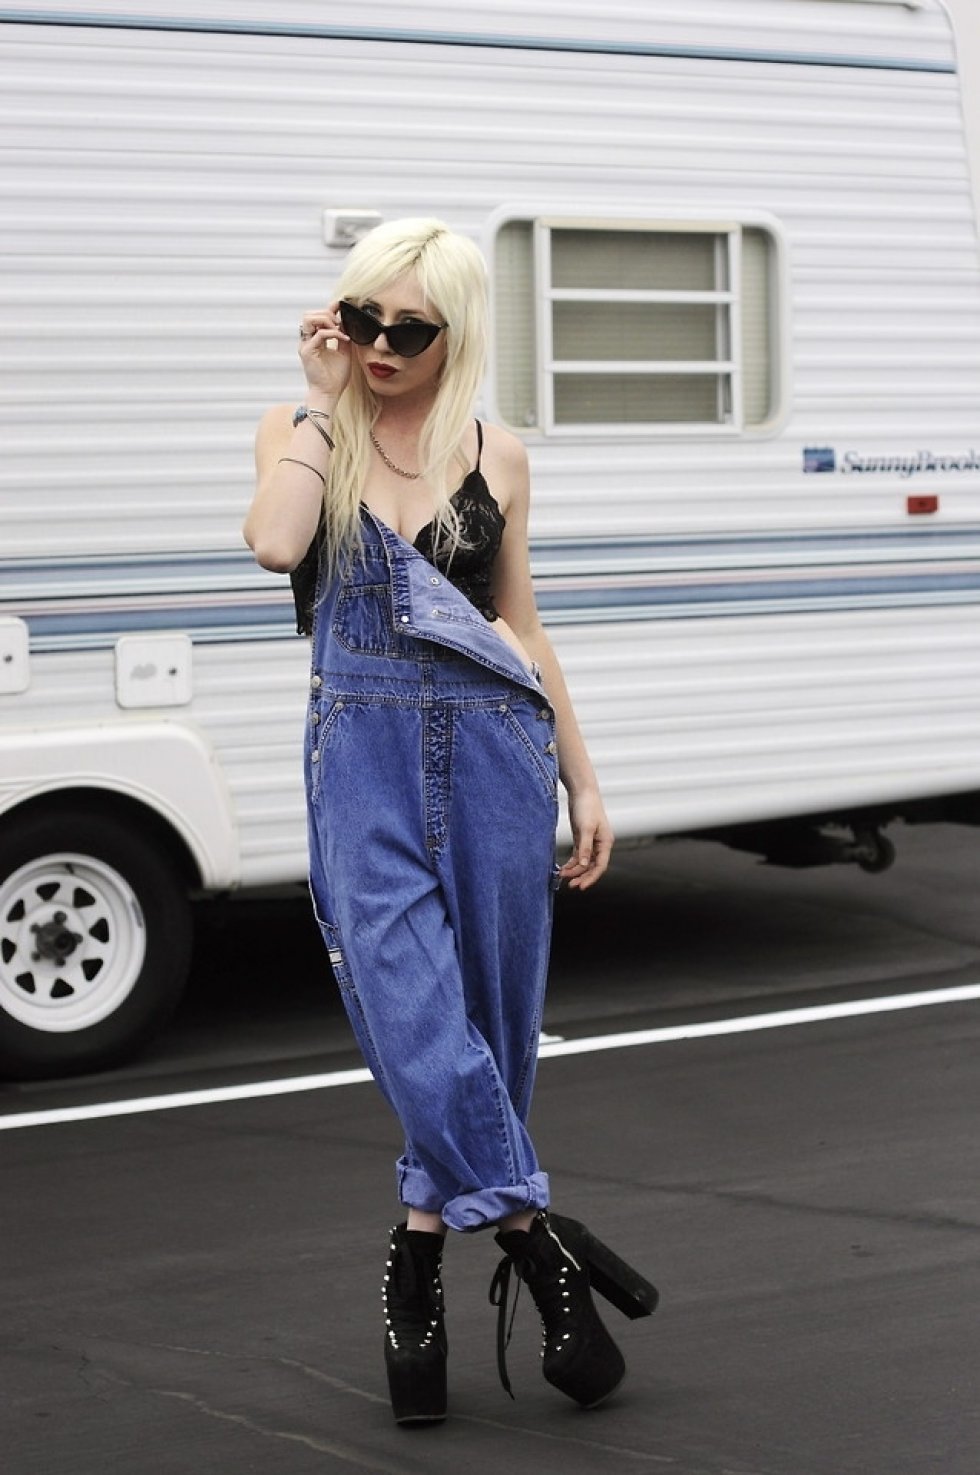 Foto: http://lookbook.nu/look/3560181-Captains-Helm-Sunglasses-Vintage-Lace-Top-Thrifted - Trend 2013: Overalls